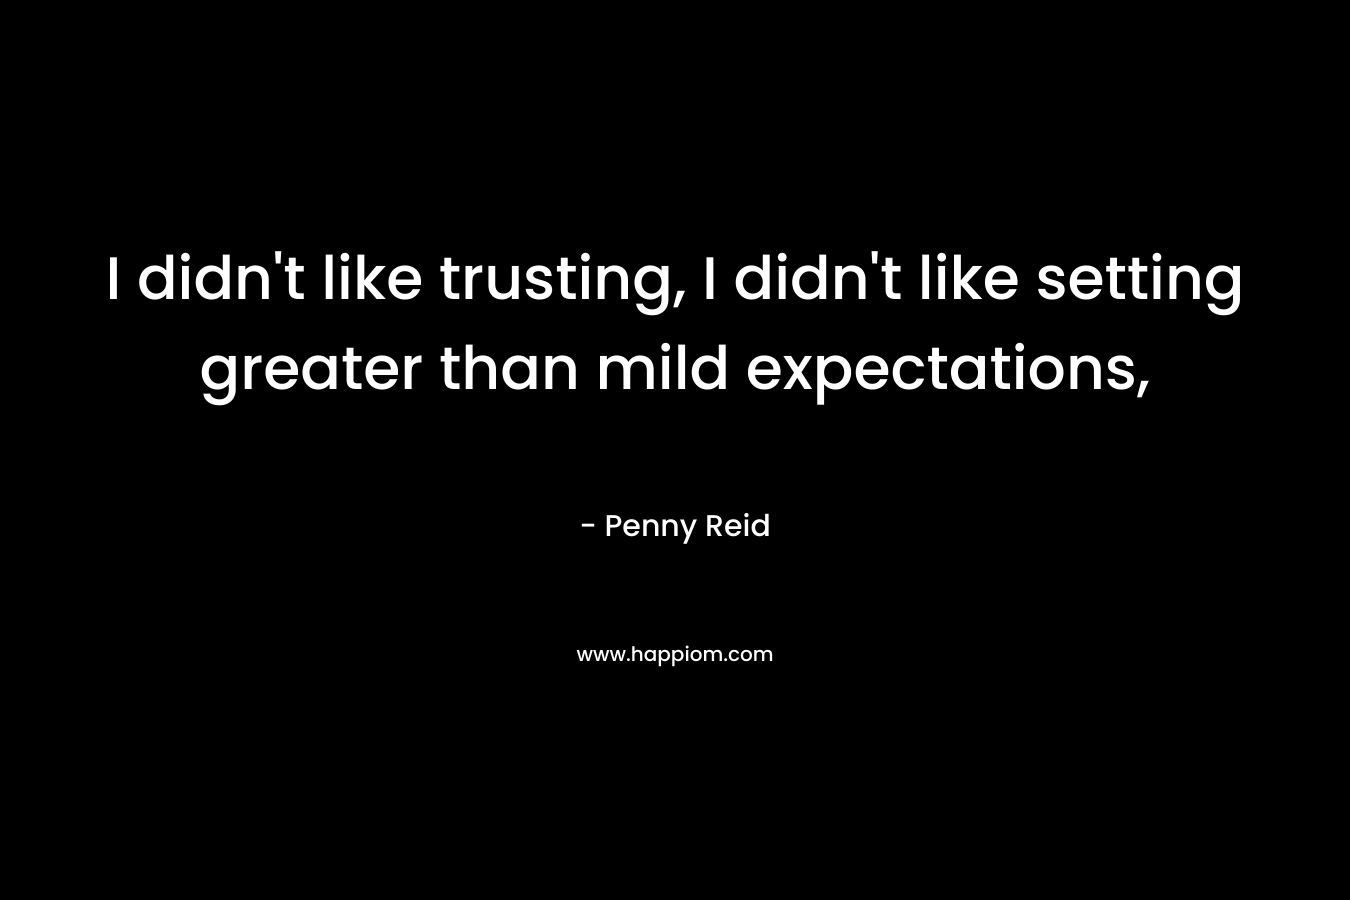 I didn’t like trusting, I didn’t like setting greater than mild expectations, – Penny Reid